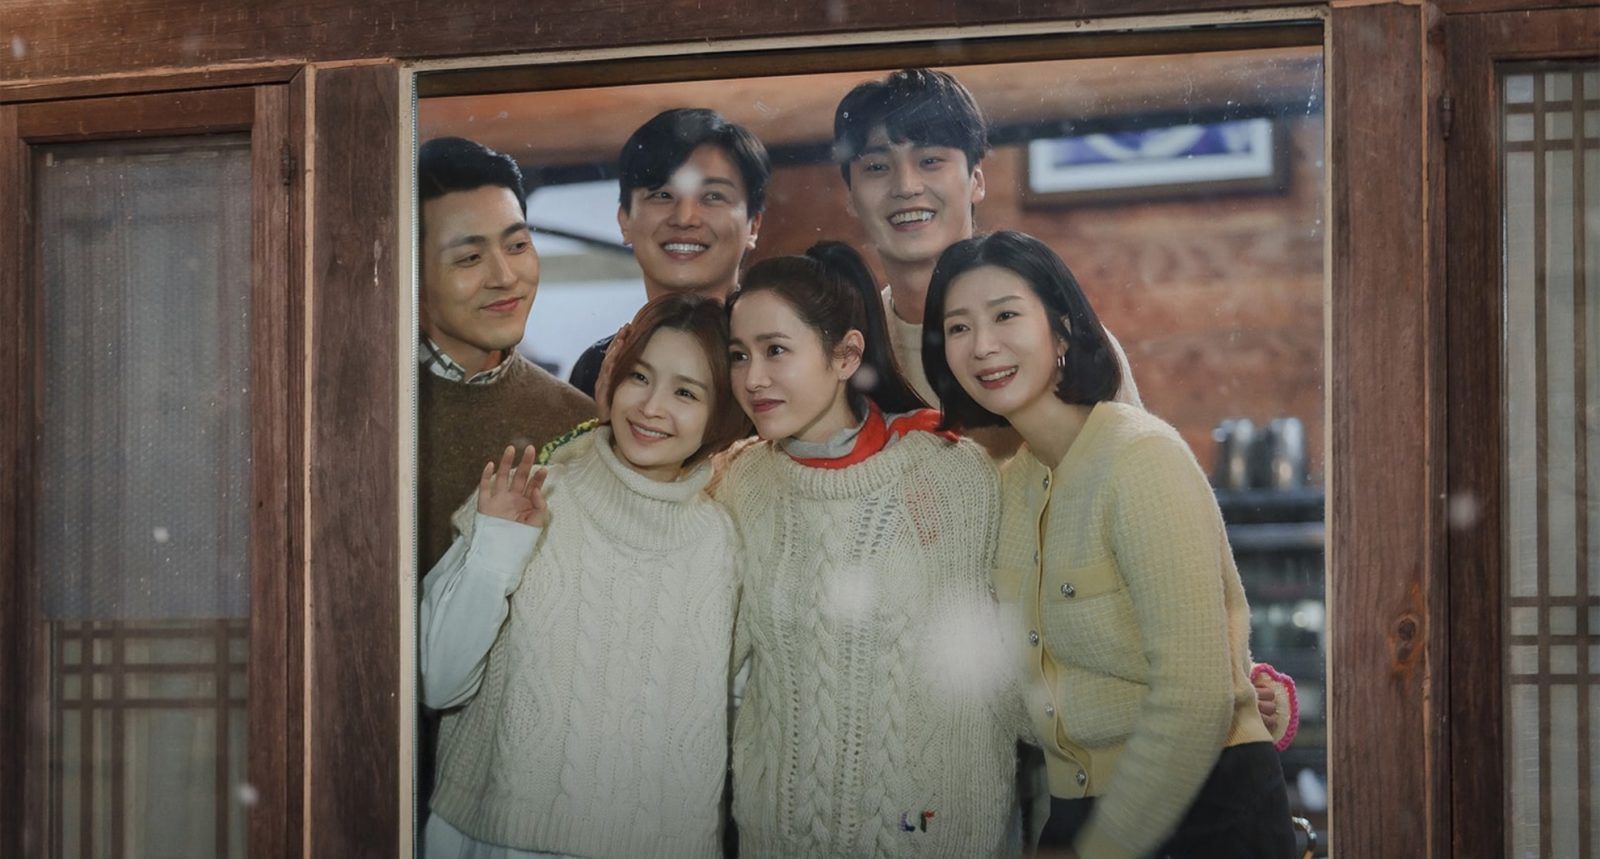 Popular K-drama ‘Thirty-Nine’ ends on a high note with massive viewership ratings